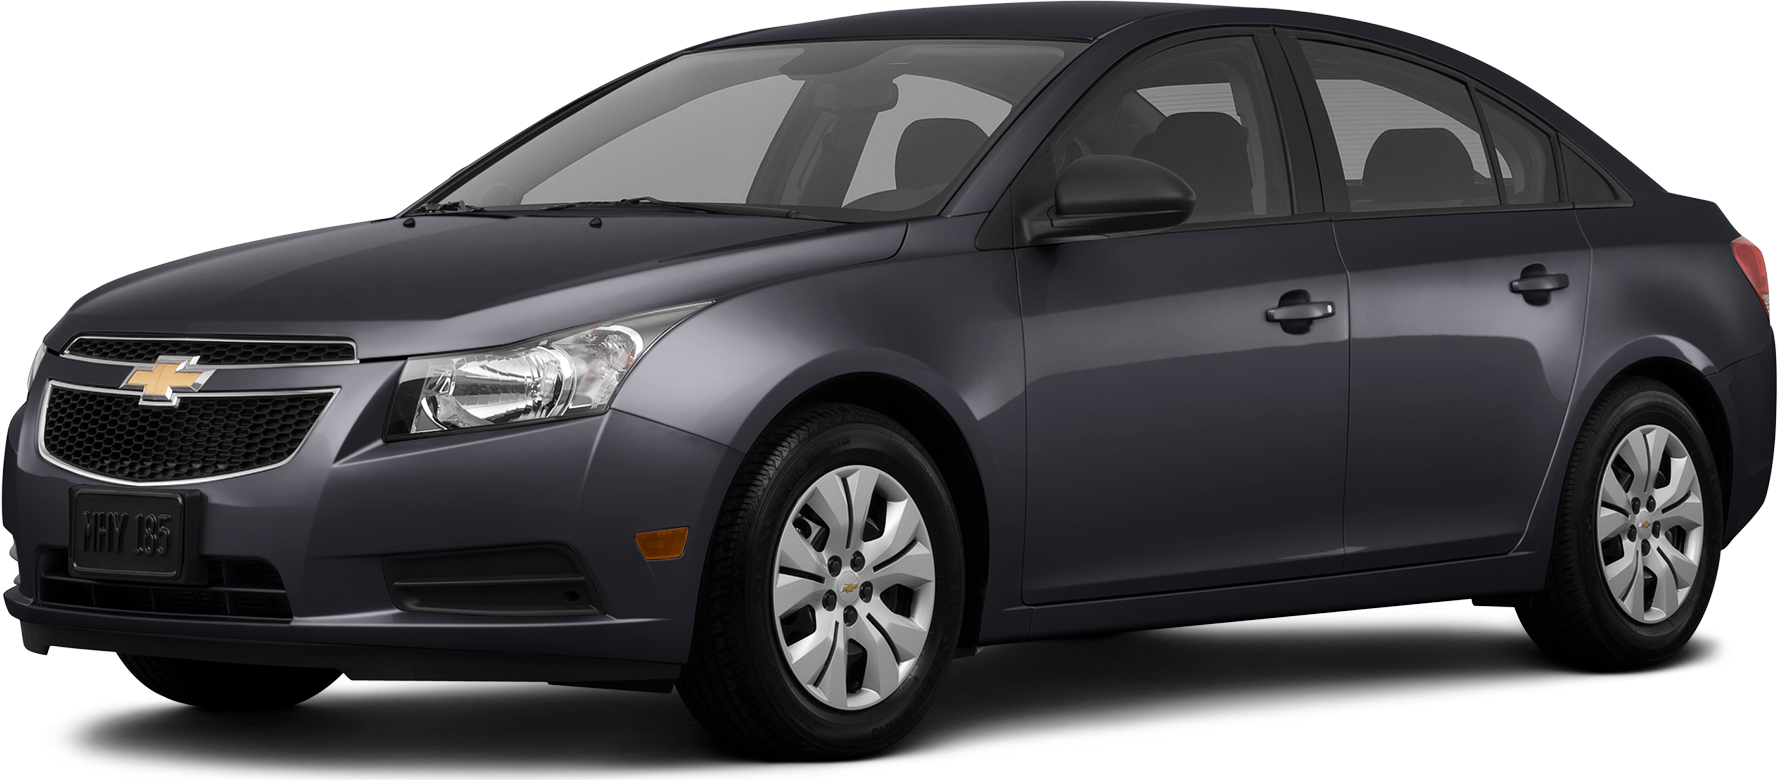 2013 Chevy Cruze Values  Cars for Sale  Kelley Blue Book